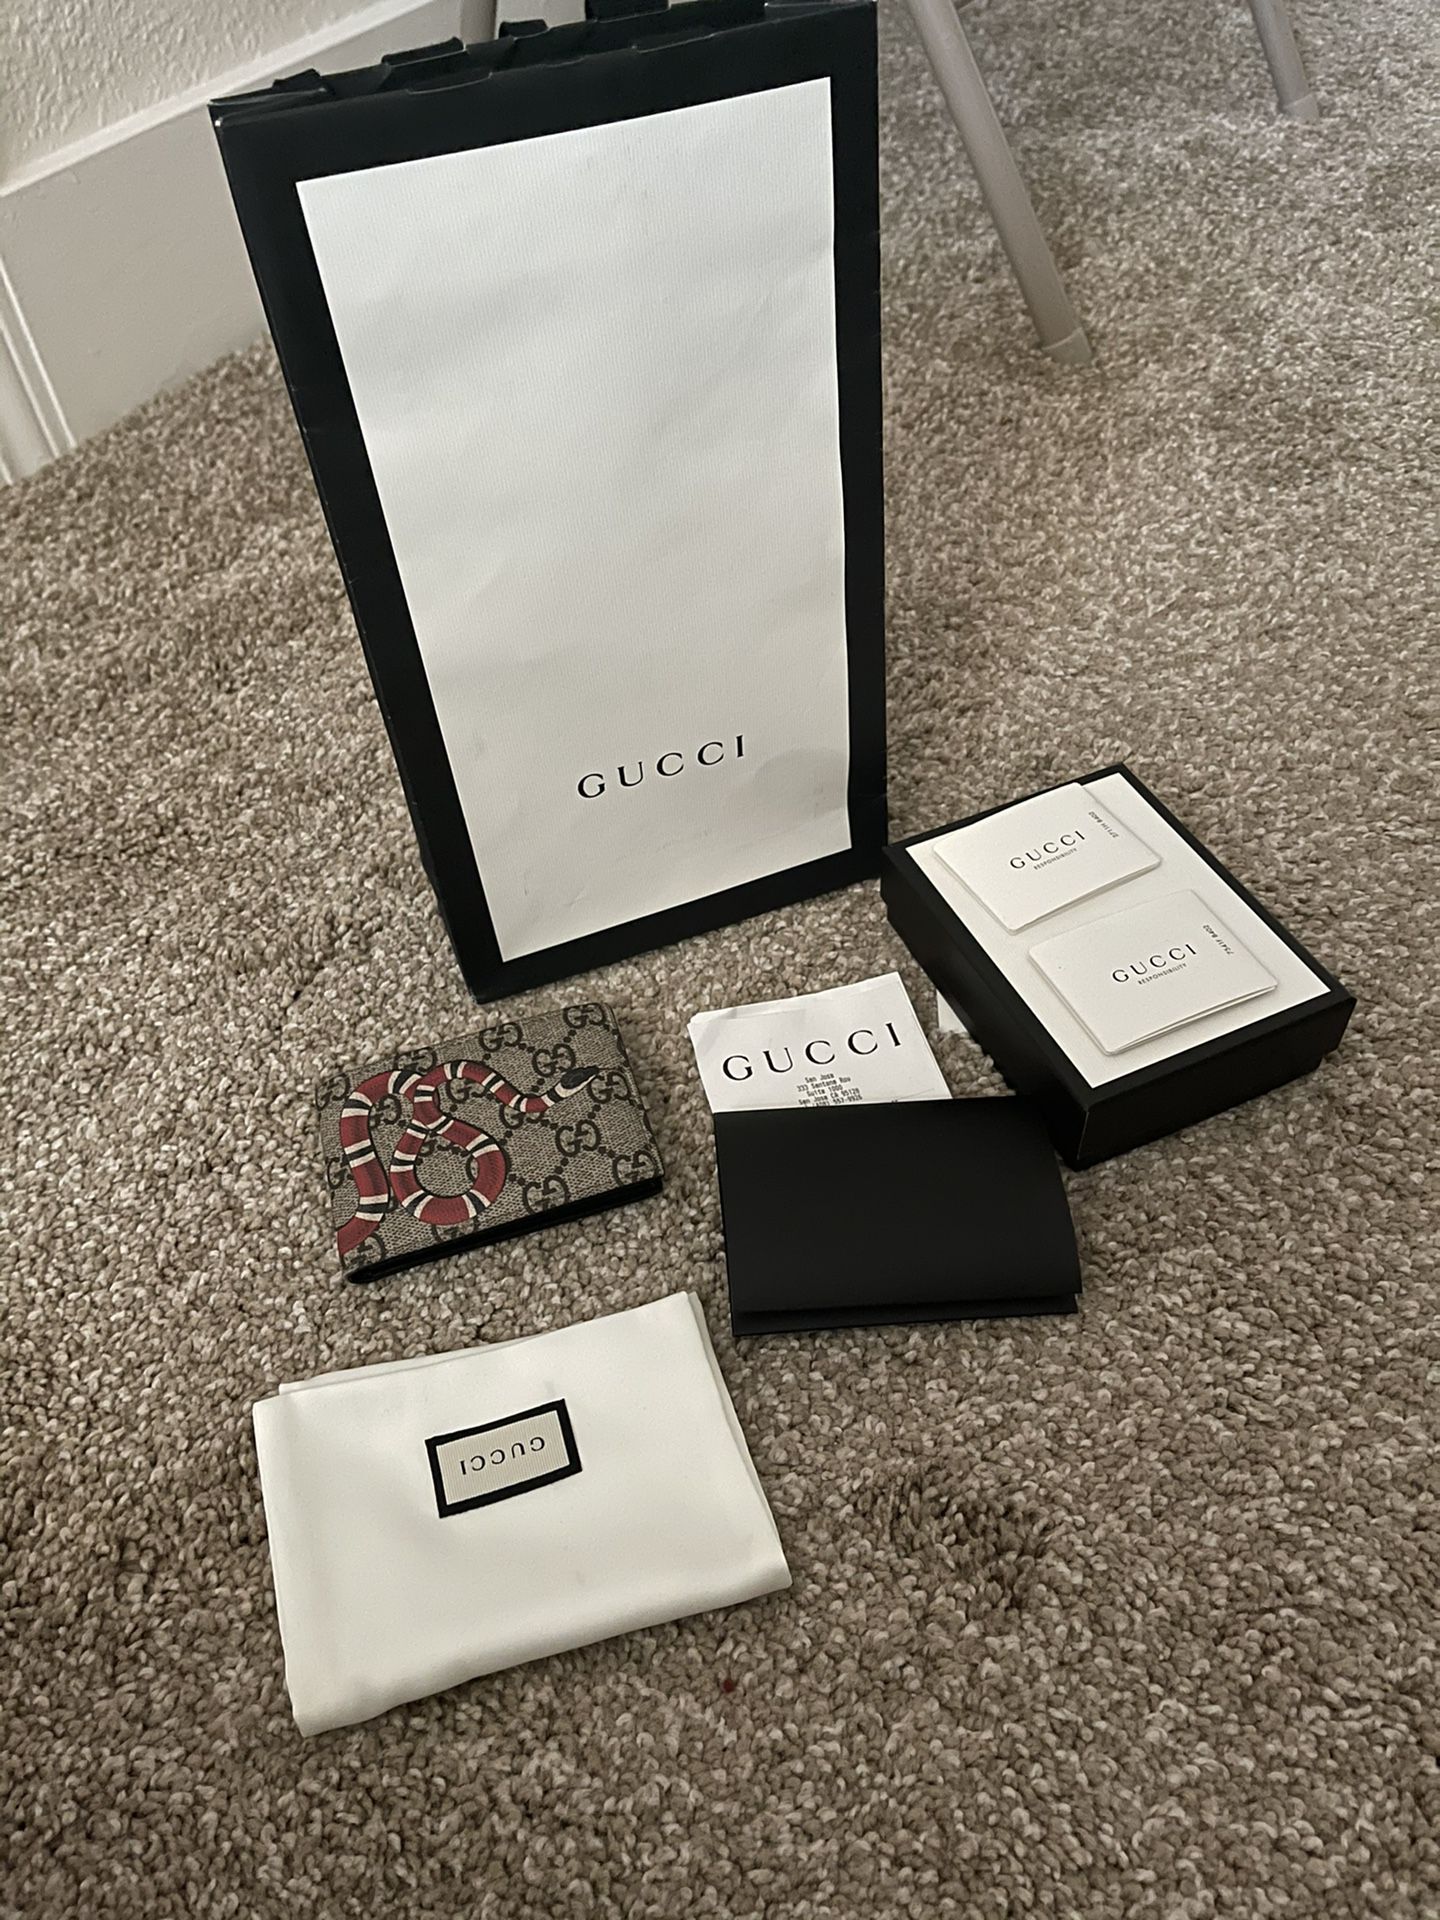 100 Percent Authentic Gucci Wallet Compact Size With Receipt